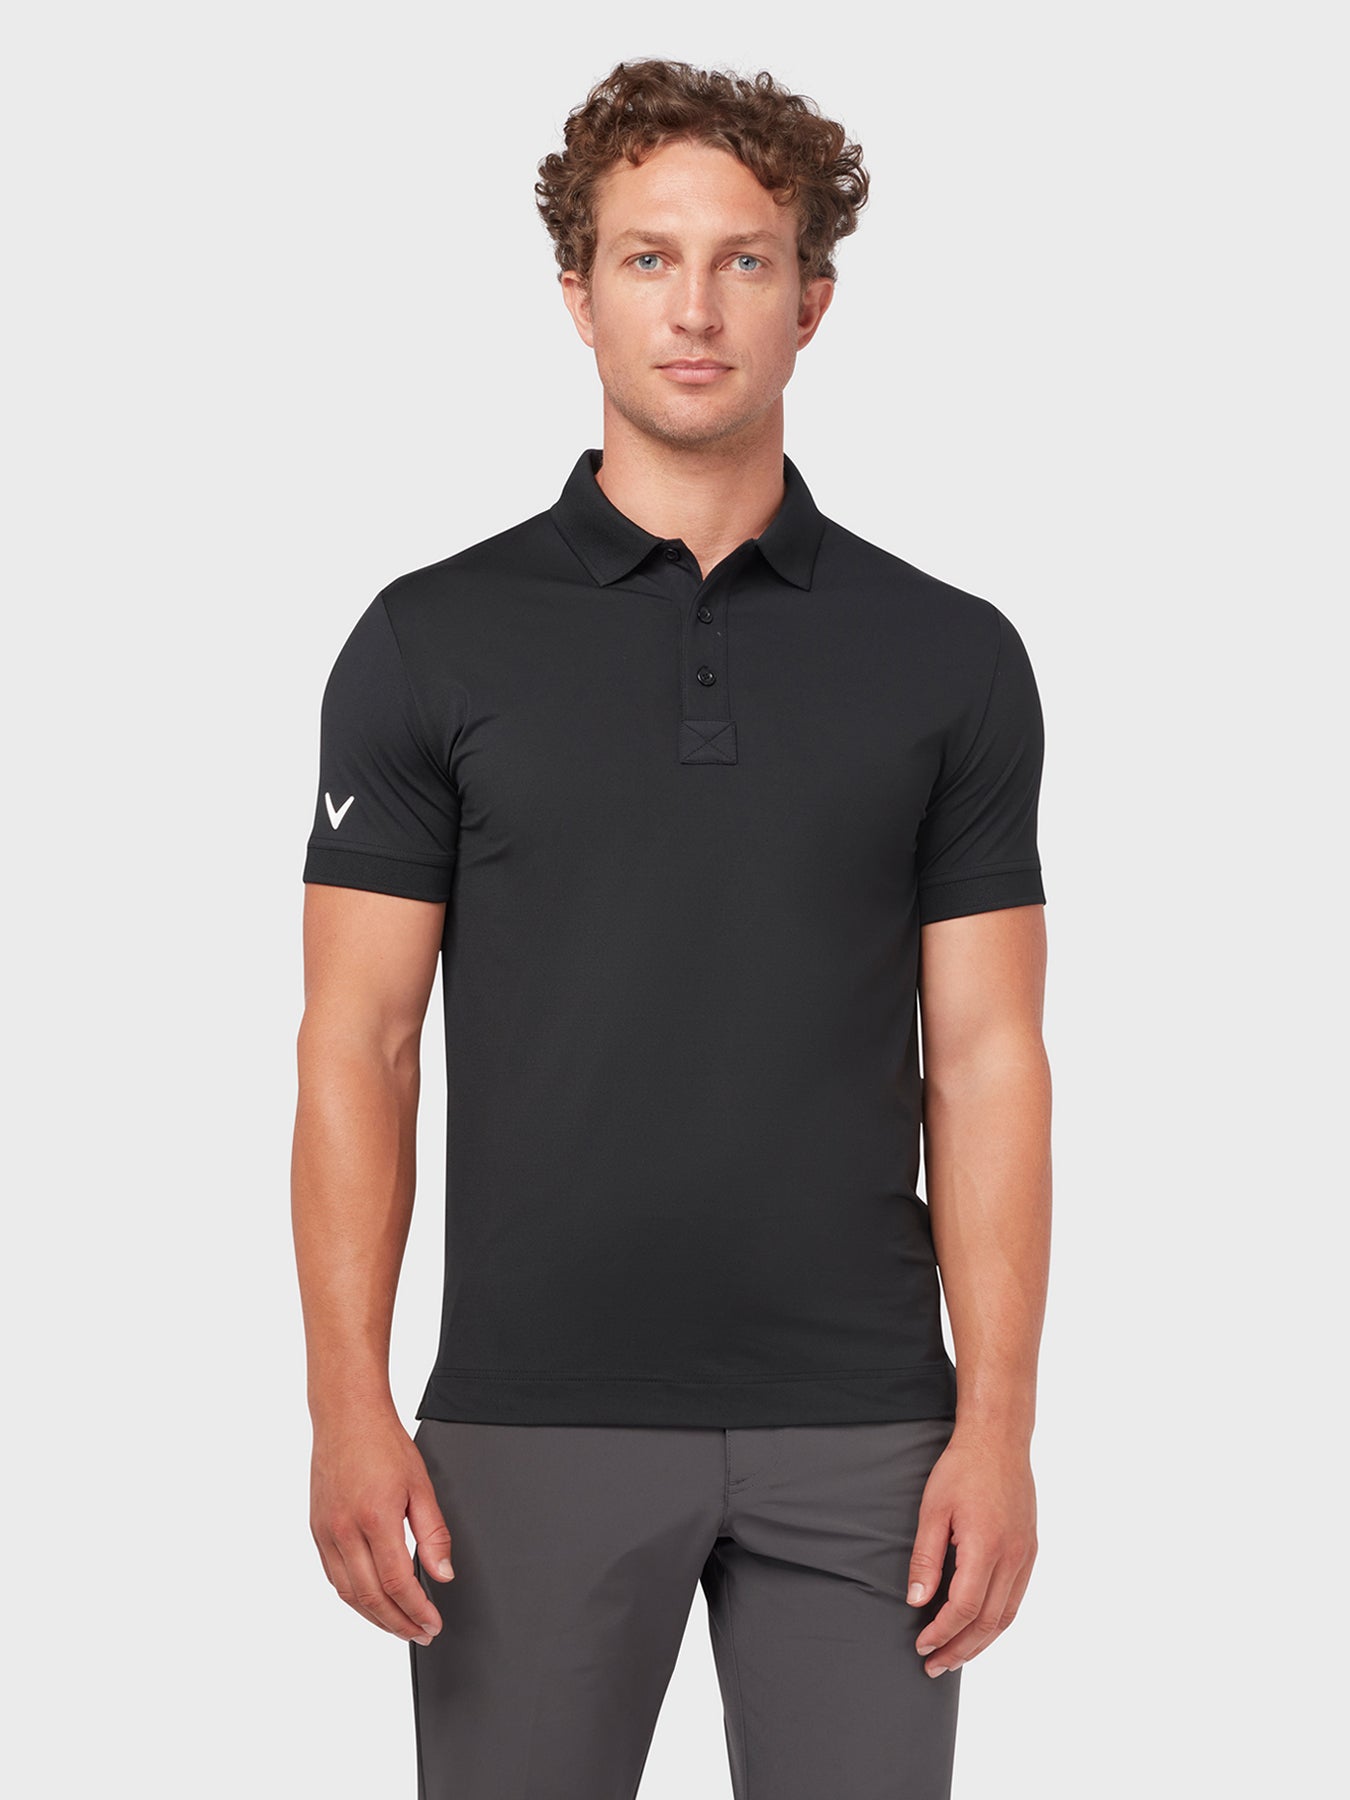 View X Series Solid Ribbed Polo In Caviar information